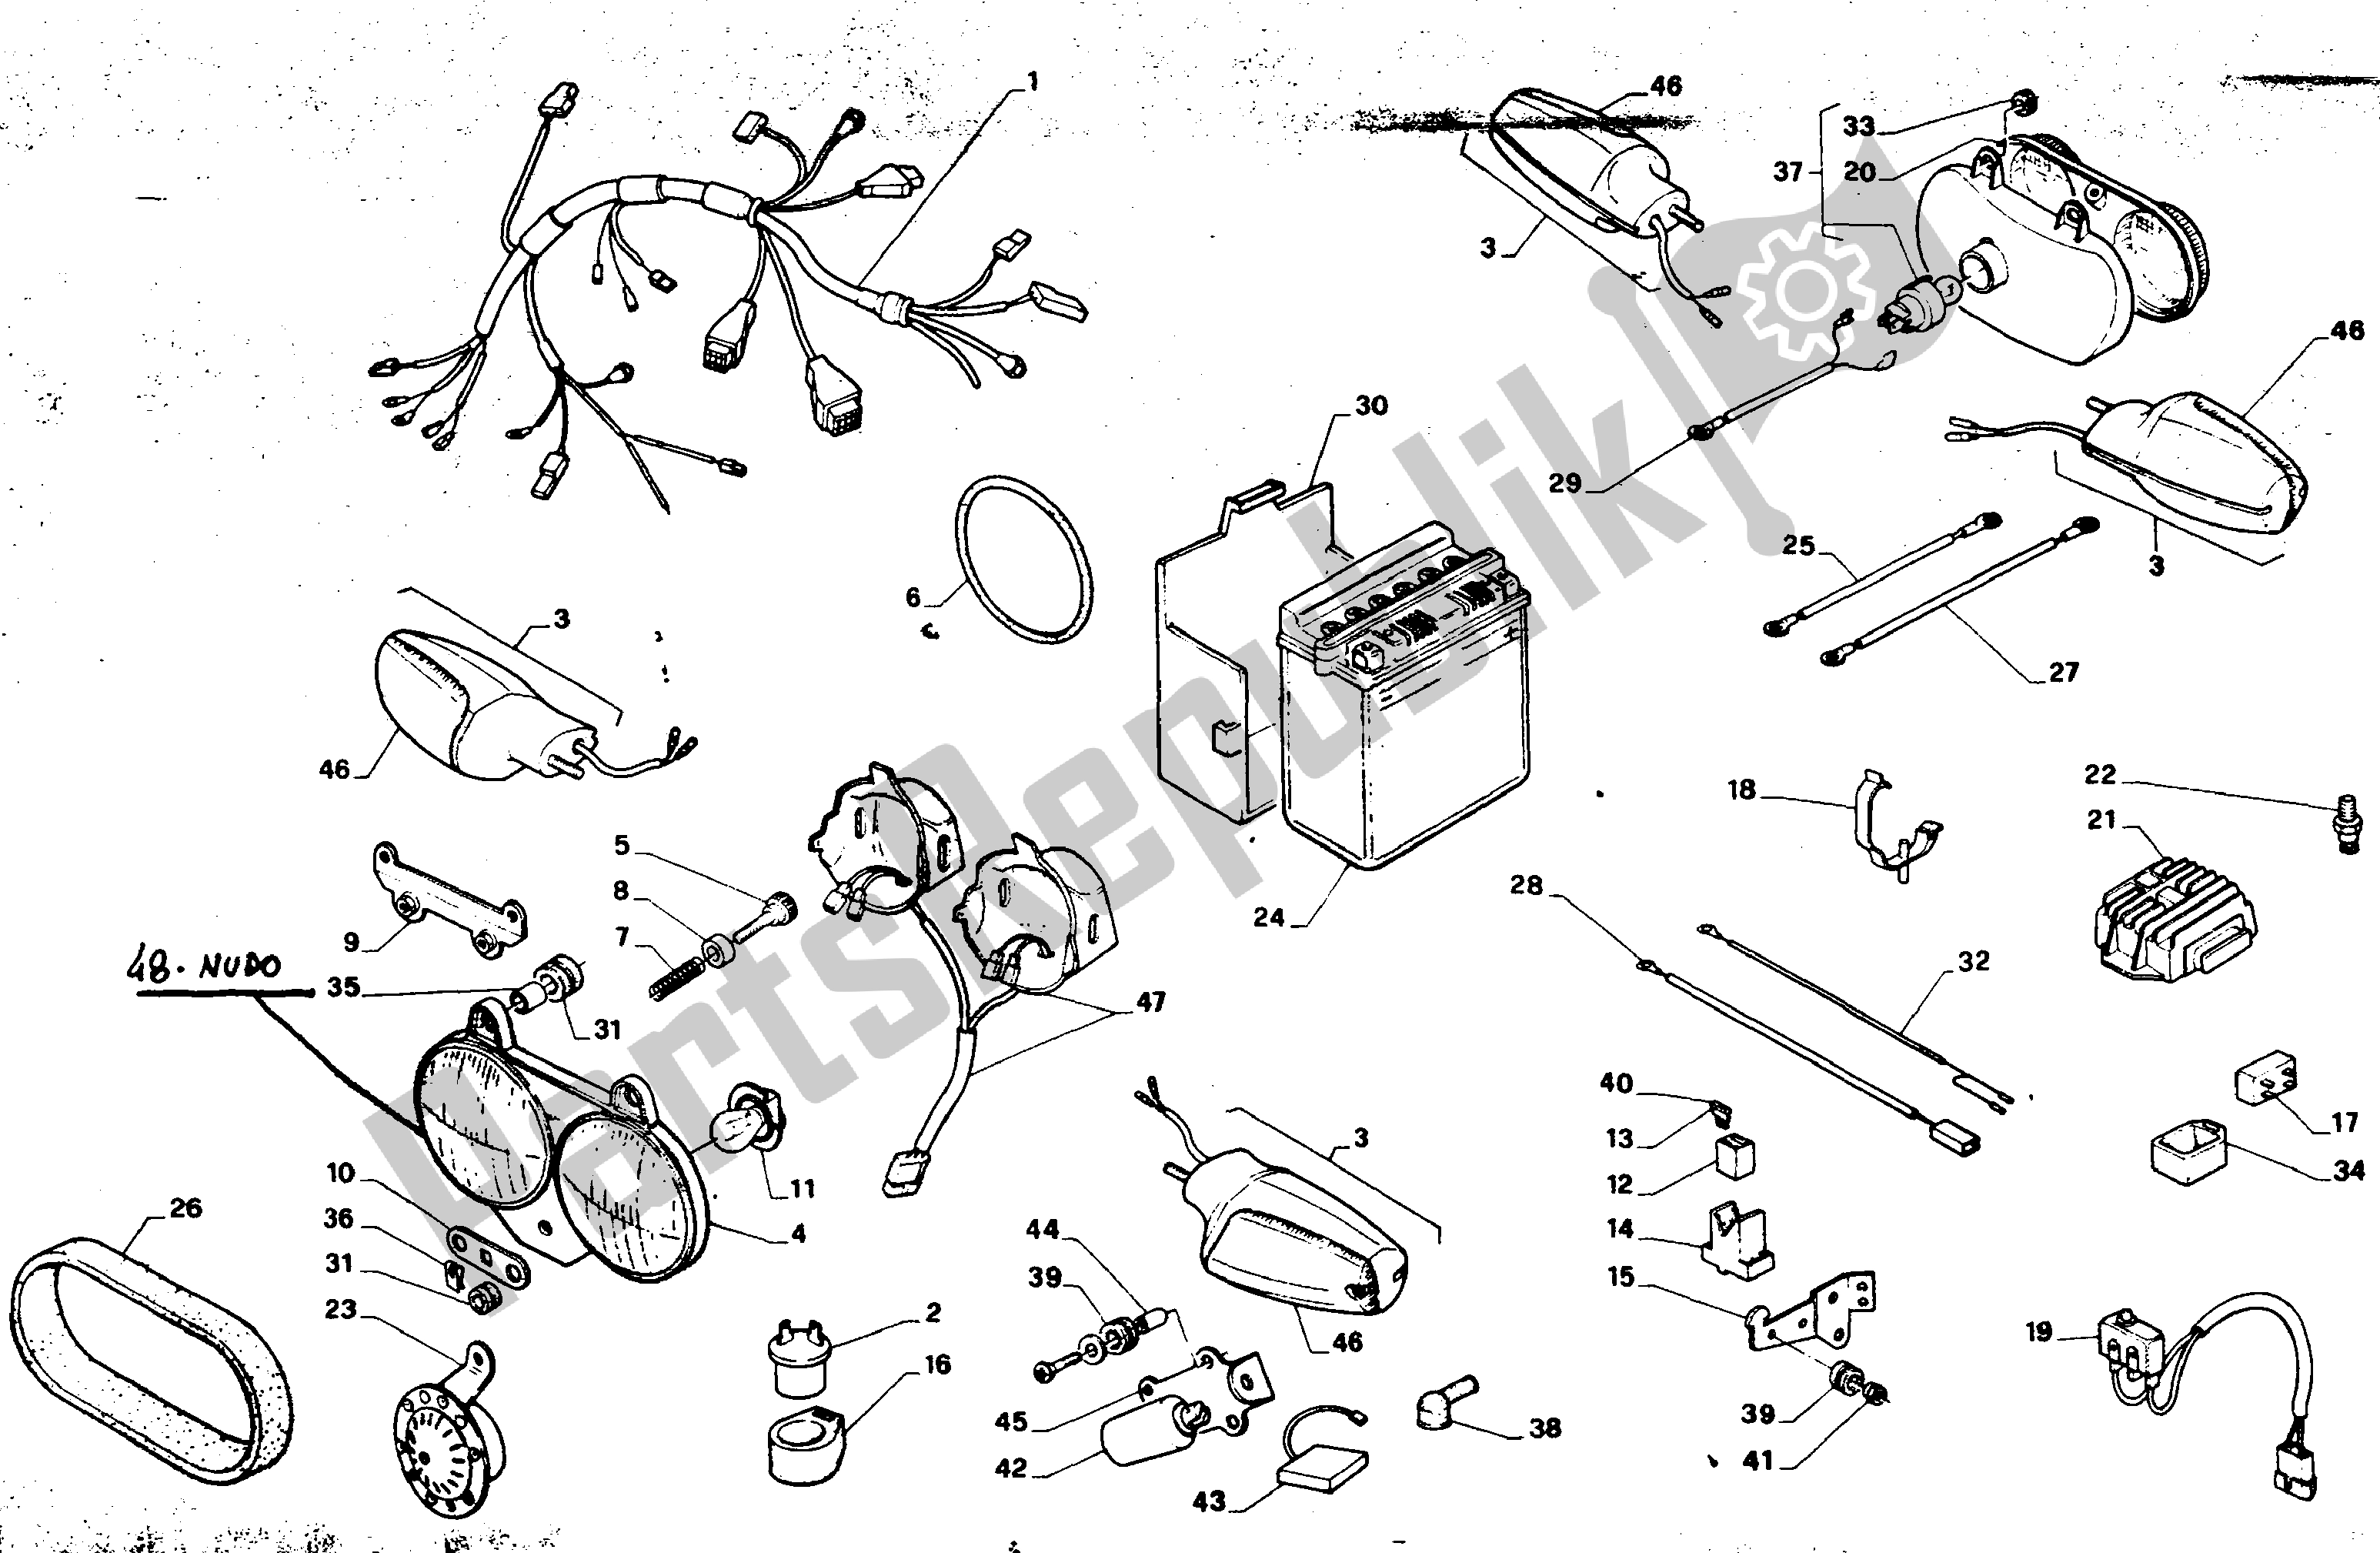 All parts for the Electrical System of the Aprilia AF1 125 1989